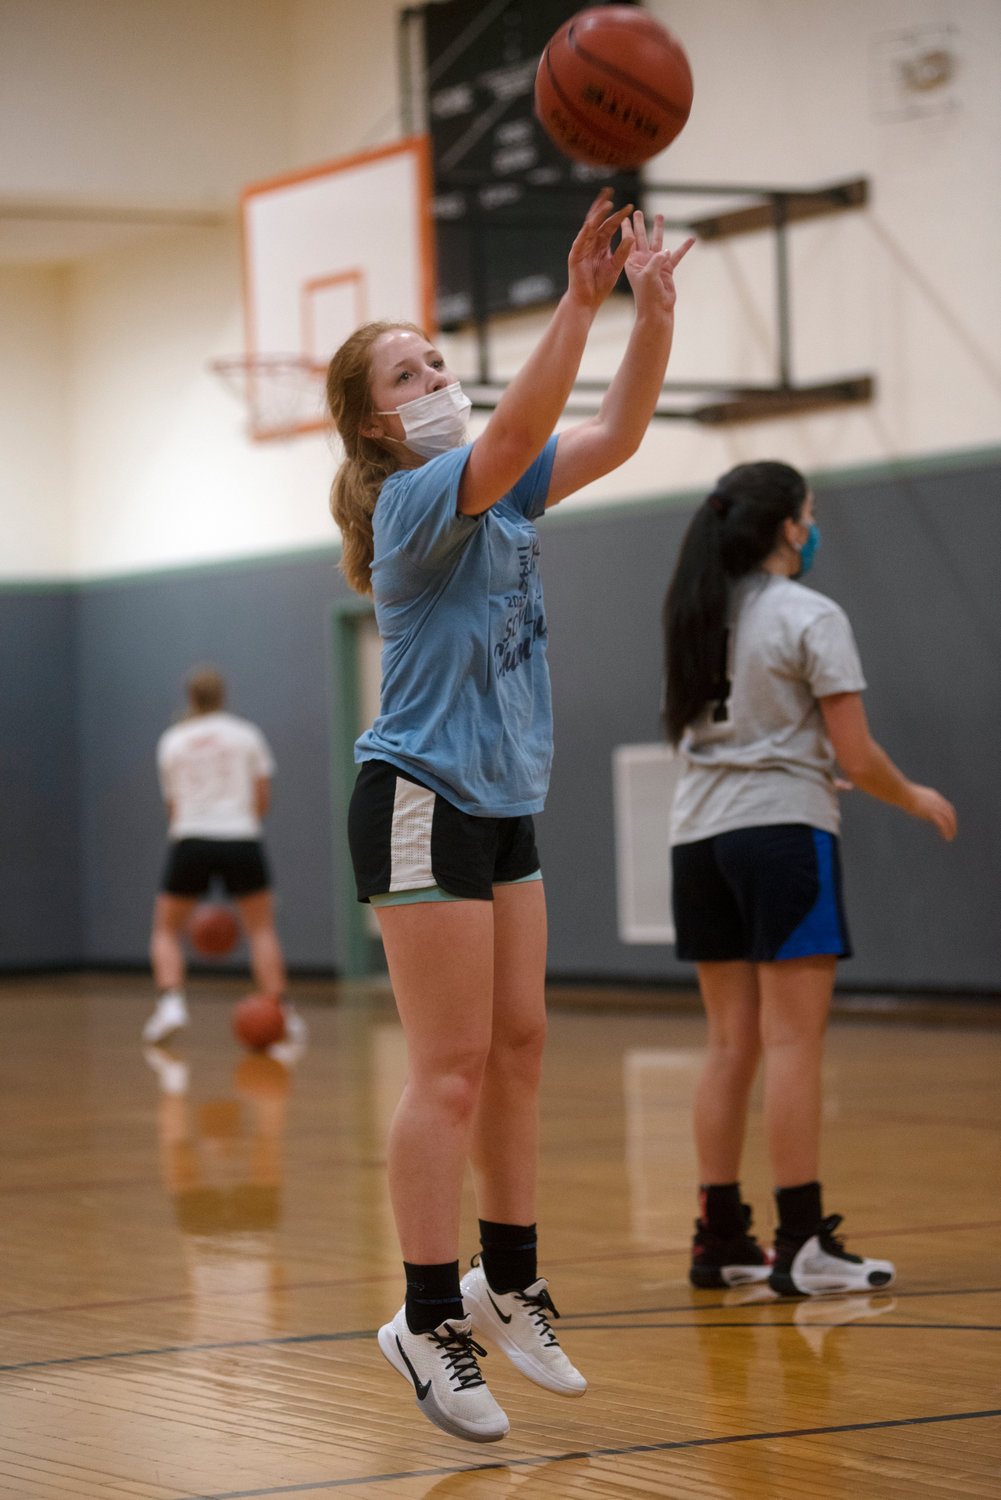 Toledo senior Grace Tauscher rises for a jump shot during the Indians’ practice session on Tuesday.